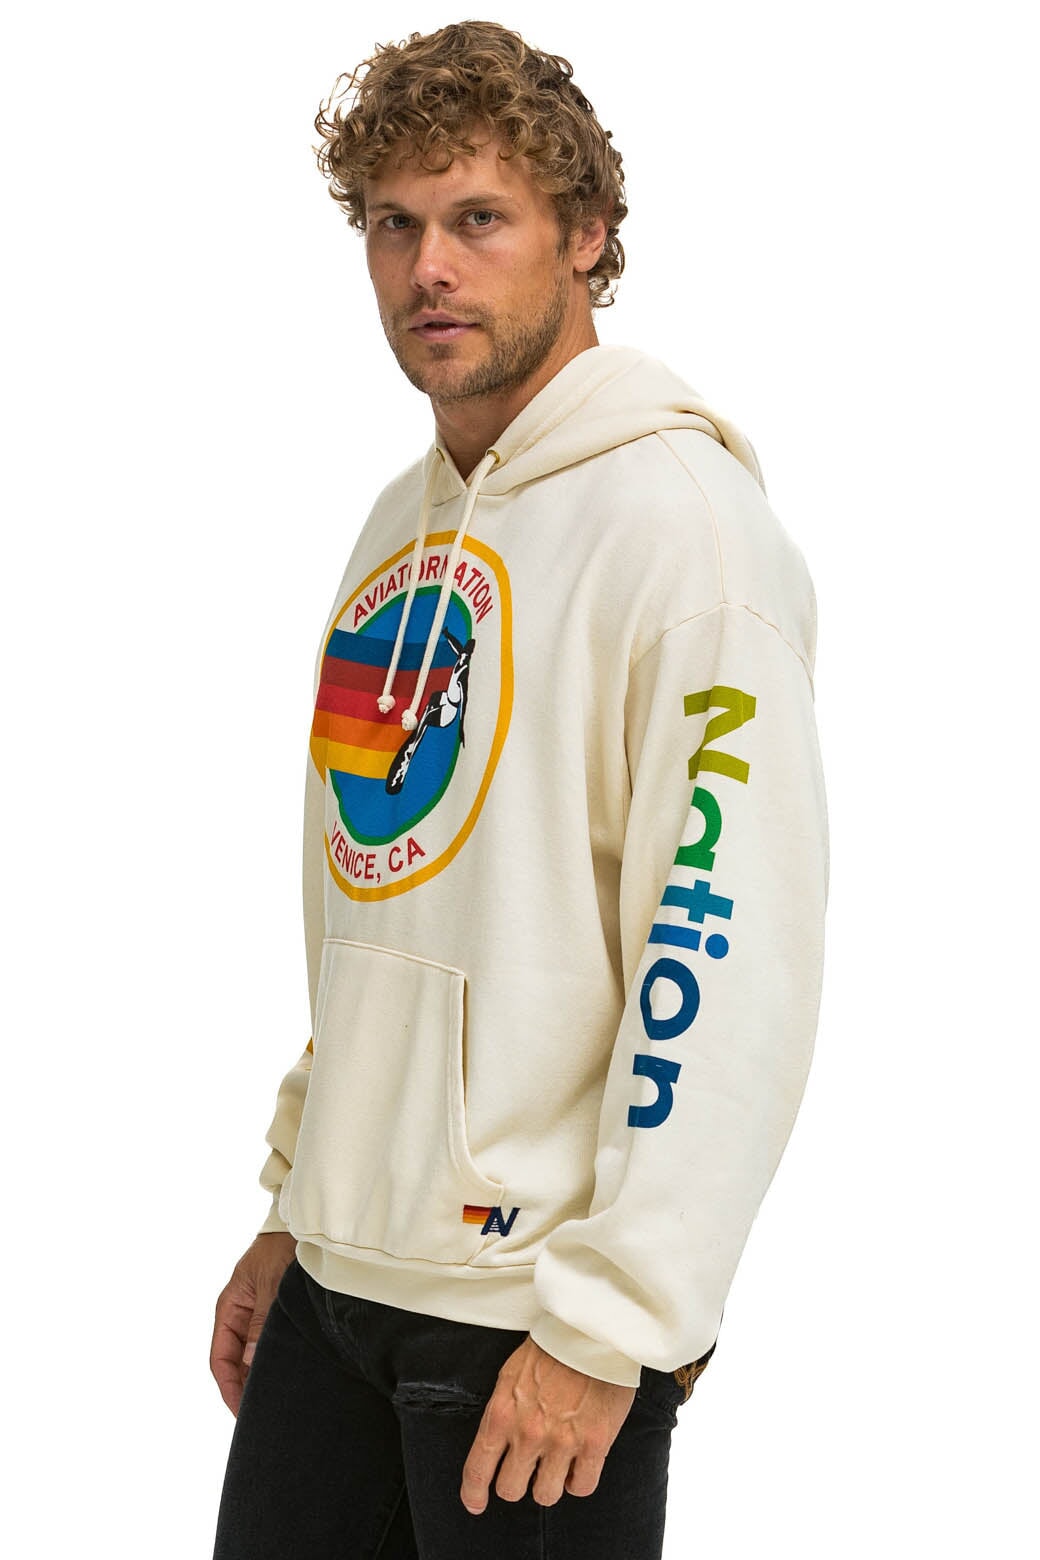 AVIATOR NATION RELAXED PULLOVER HOODIE - VINTAGE WHITE Hoodie Aviator Nation 